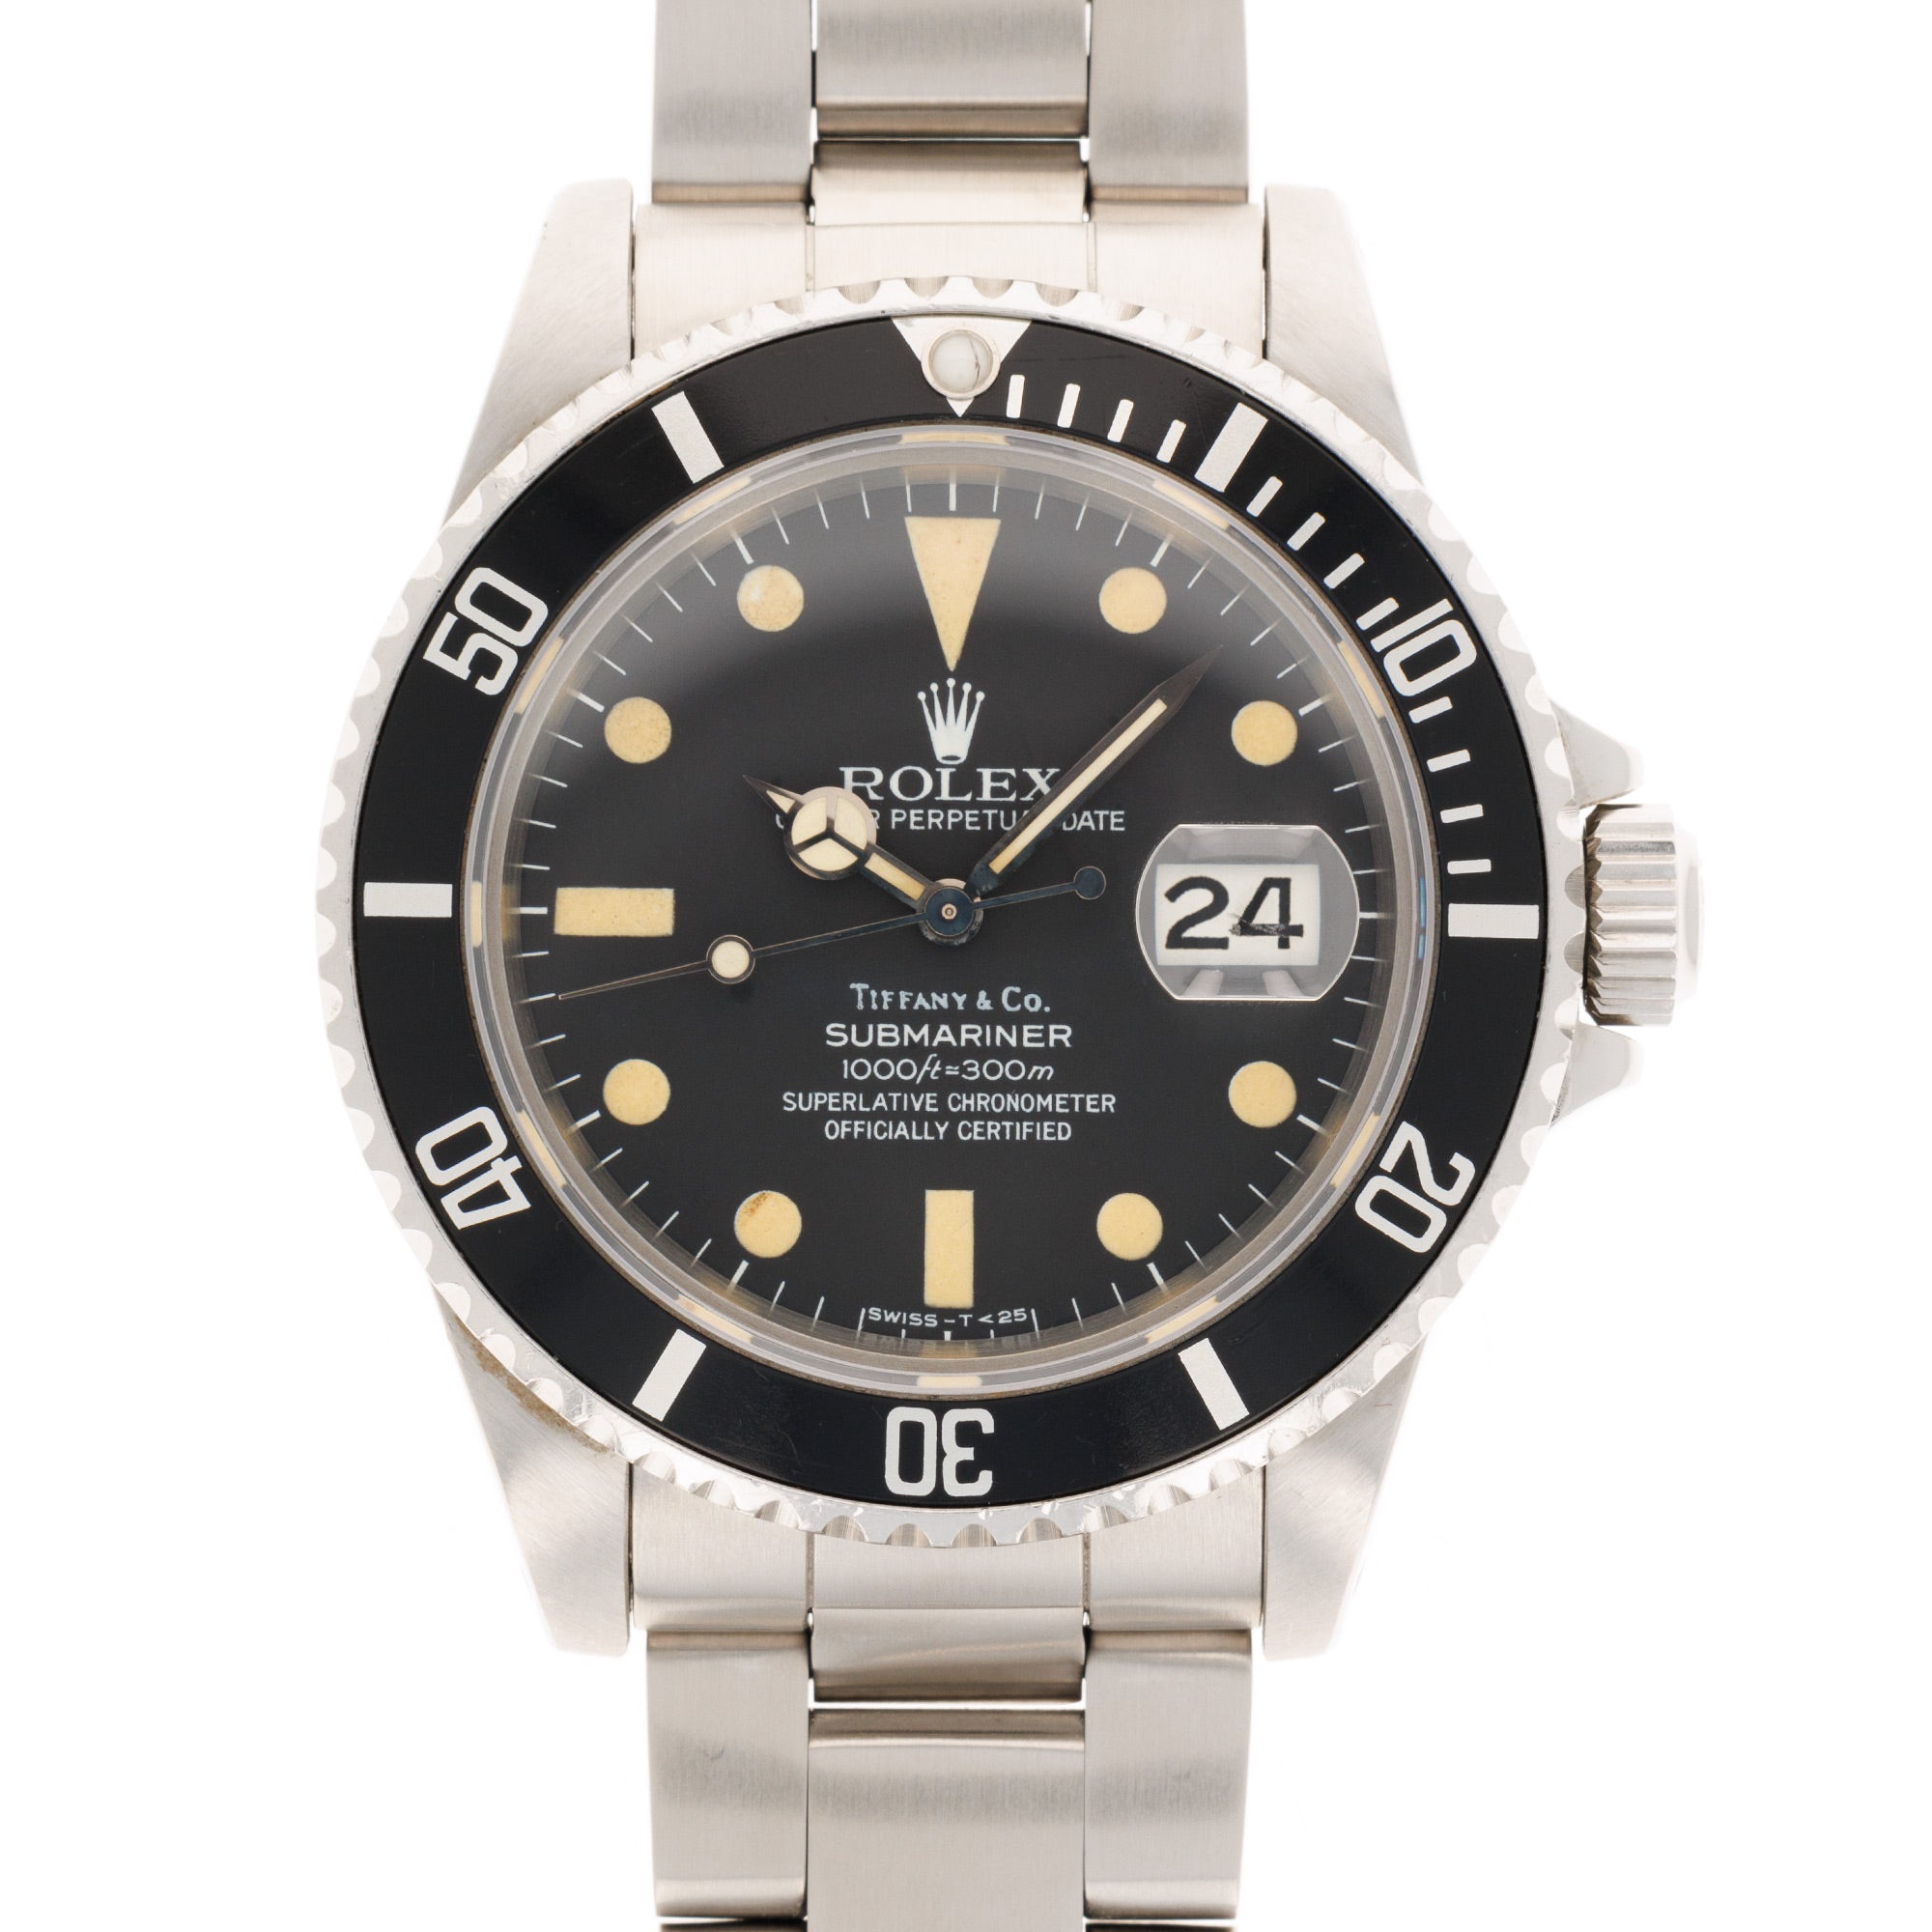 Rolex - Rolex Steel Submariner Ref. 16800, Retailed by Tiffany & Co. - The Keystone Watches